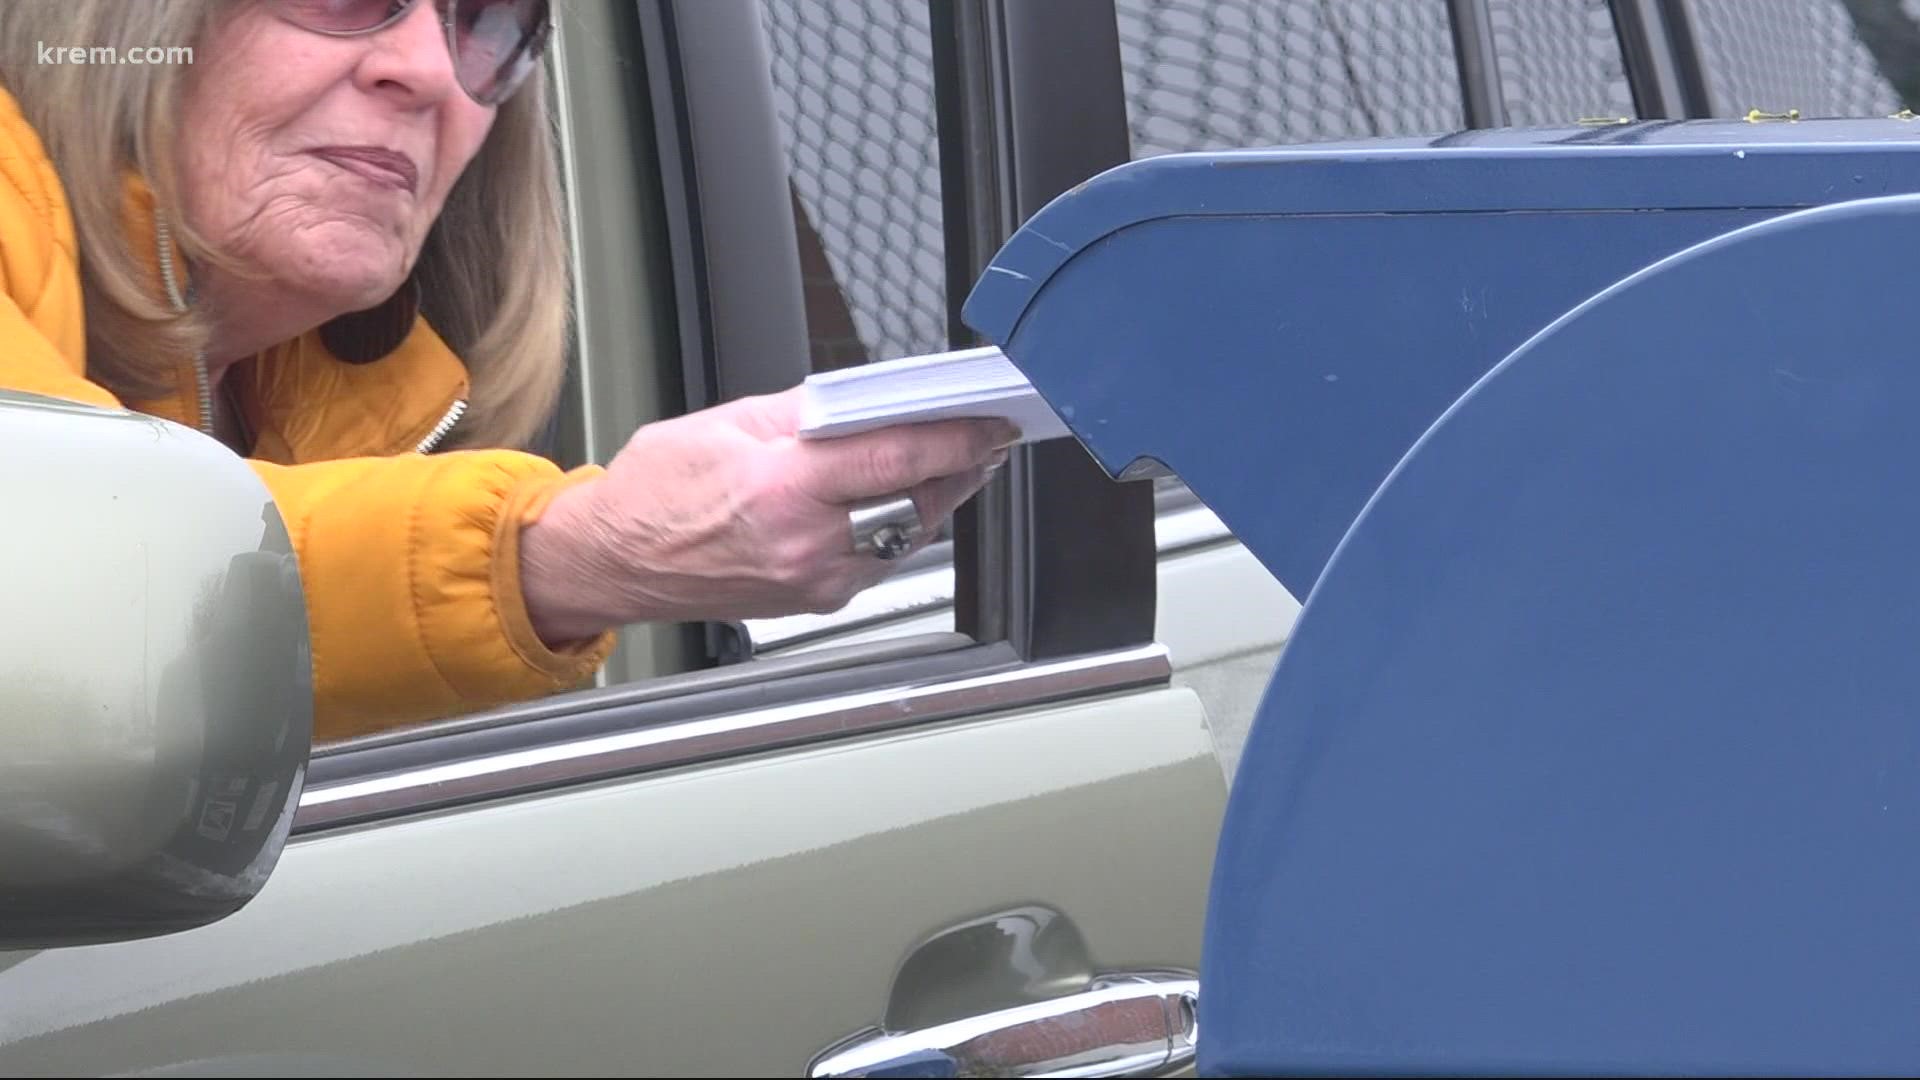 USPS is expecting to process 12 billion cards, letters and packages this season.